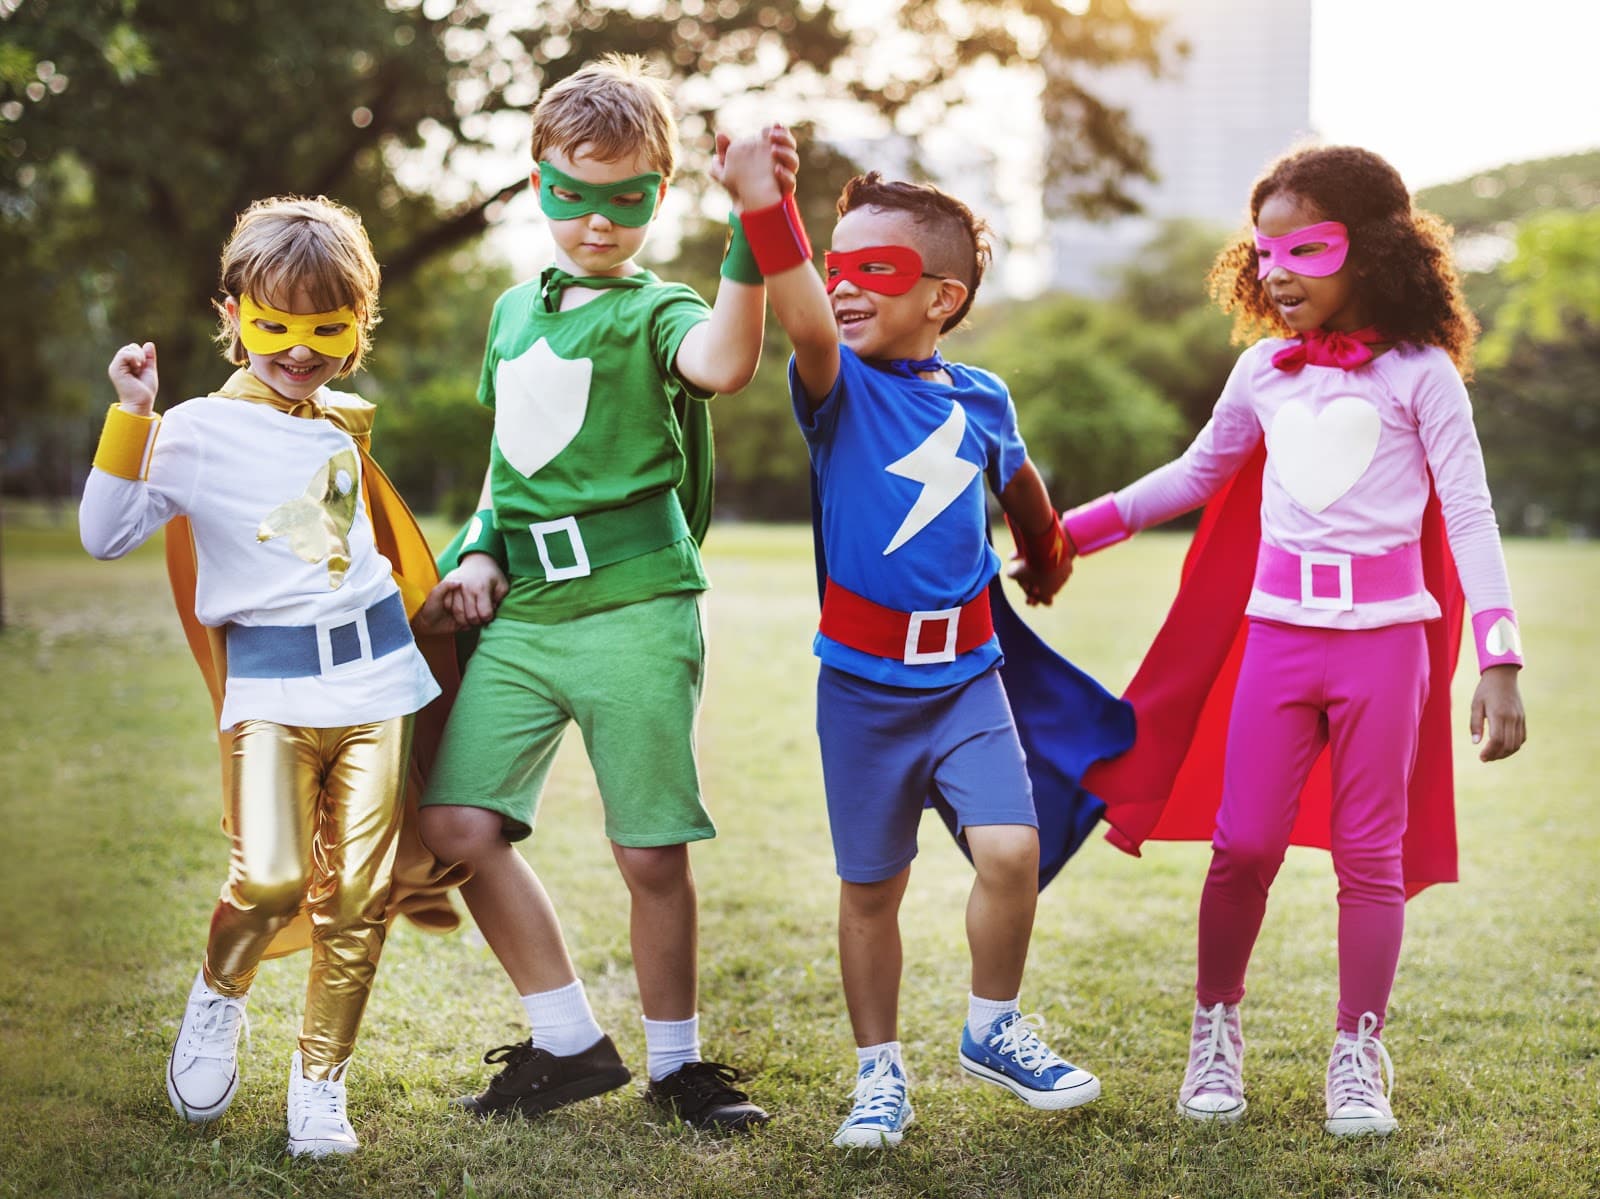 Four children dressed as superheroes